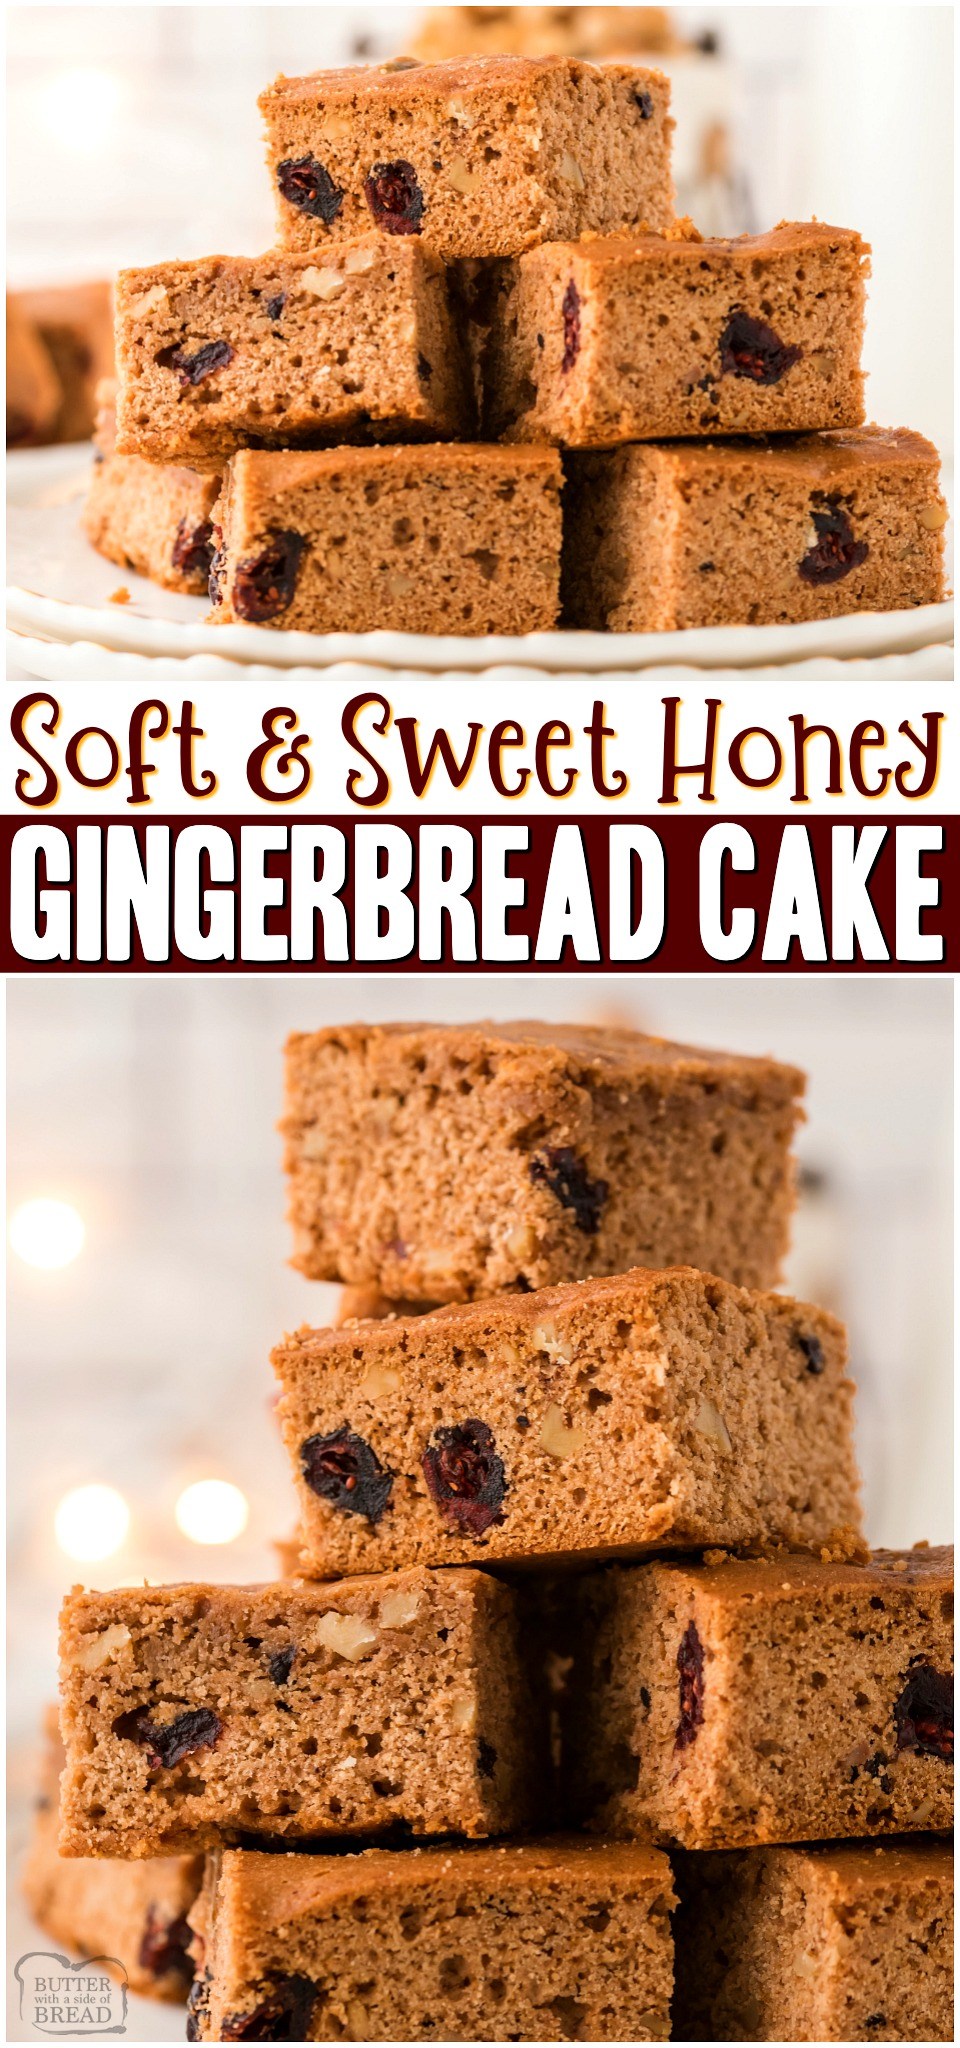 Gingerbread Cake made with honey instead of molasses for a sweetly spiced holiday cake!  Festive Gingerbread cake with cranberries & walnuts perfect for dessert! #cake #honey #gingerbread #holidays #Christmas #baking #easyrecipe from BUTTER WITH A SIDE OF BREAD